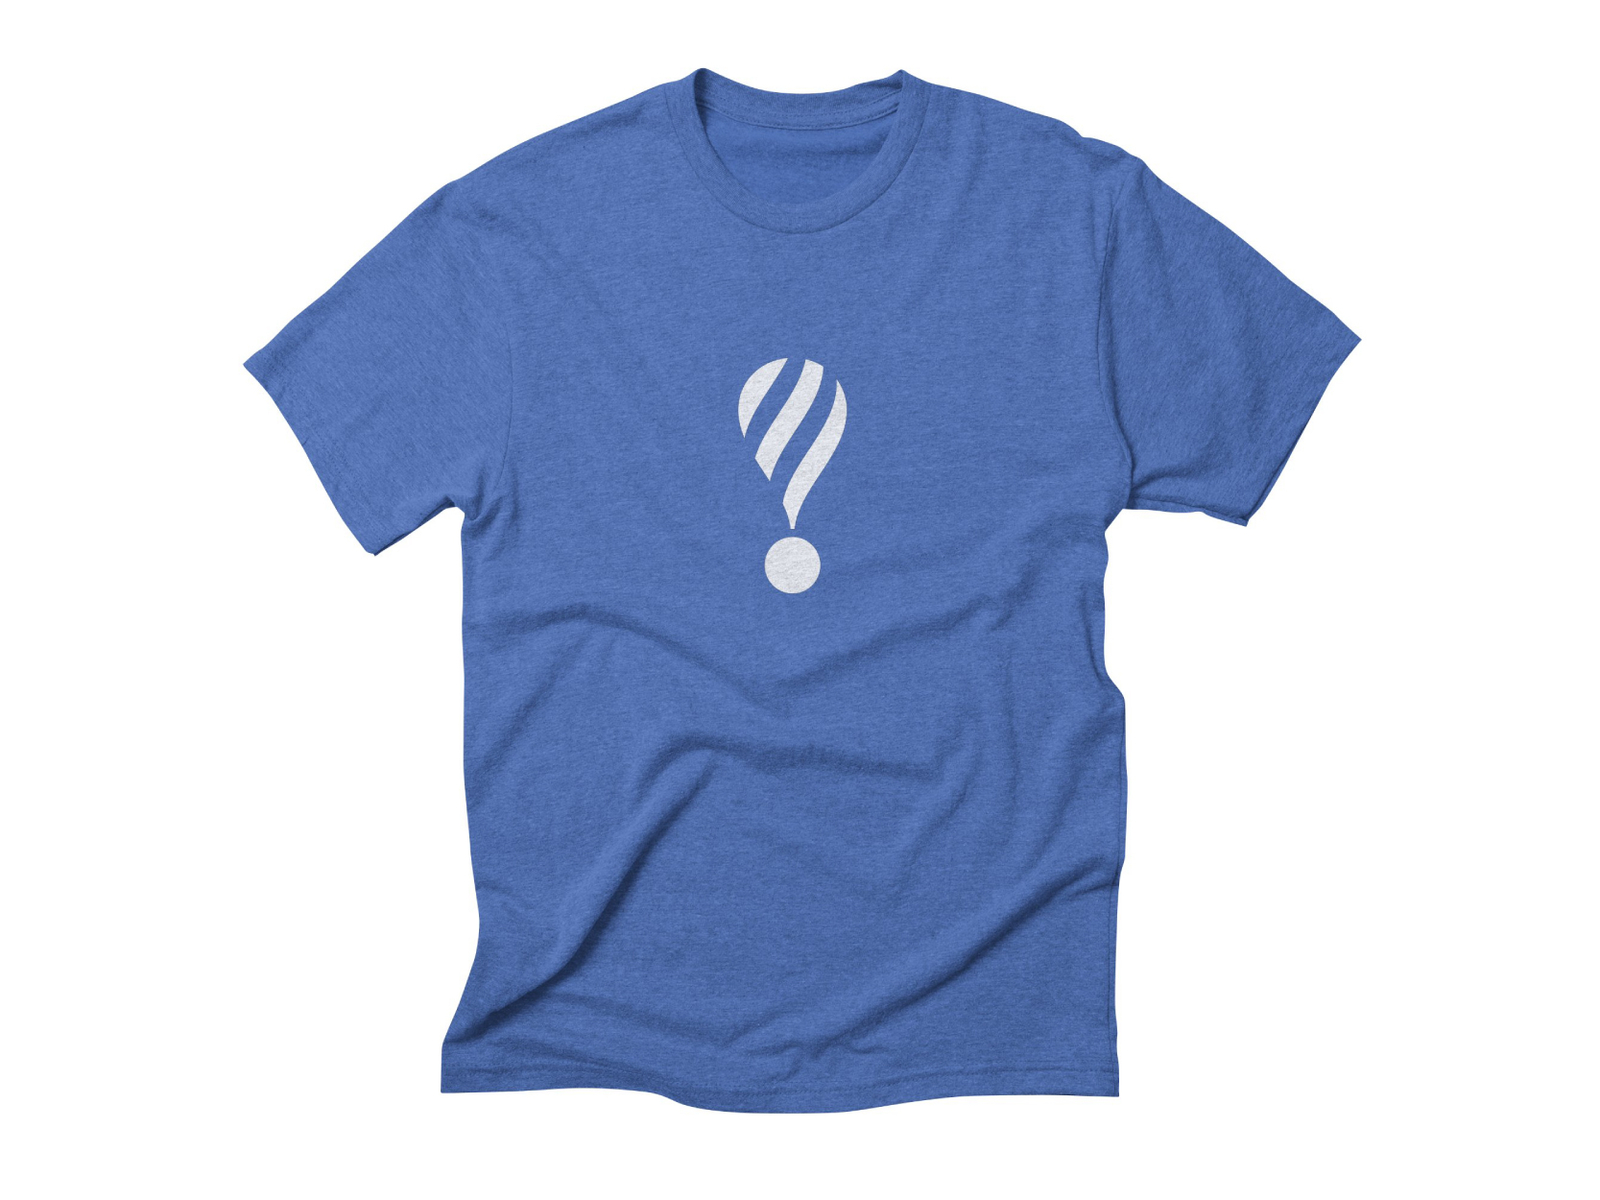 Hot Air Balloon/Exclamation Mark T-shirt by MadeByBono on Dribbble